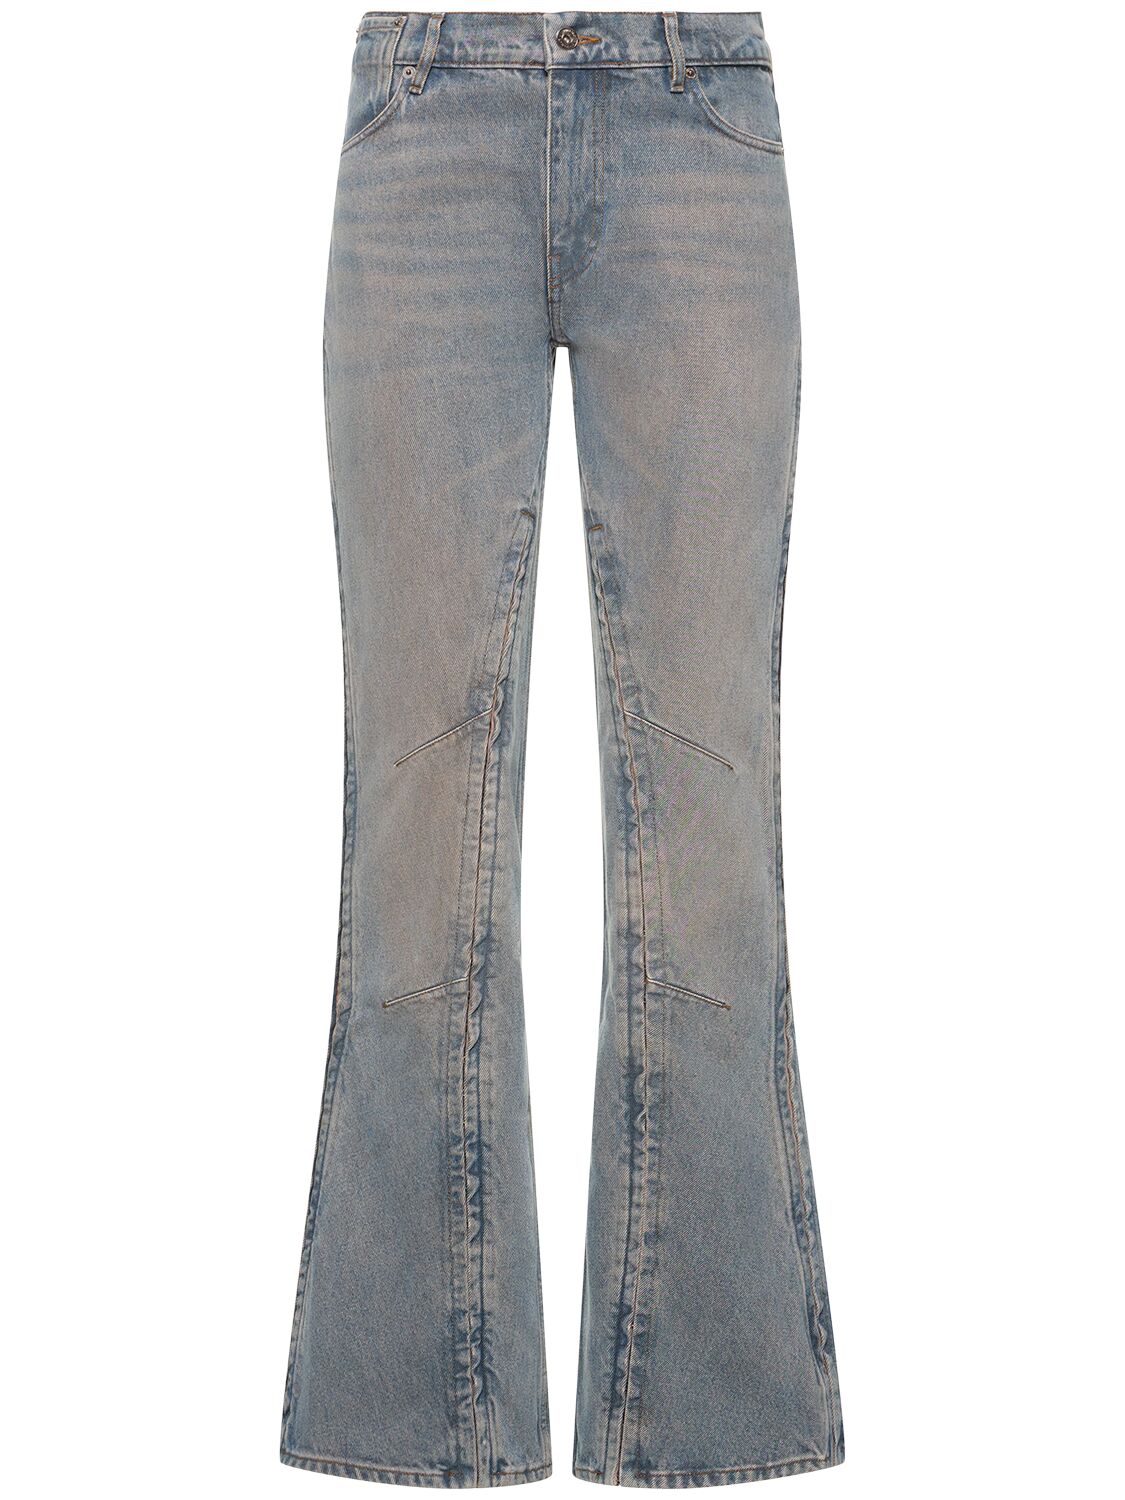 Image of Denim Low Rise Flared Jeans W/ Slits